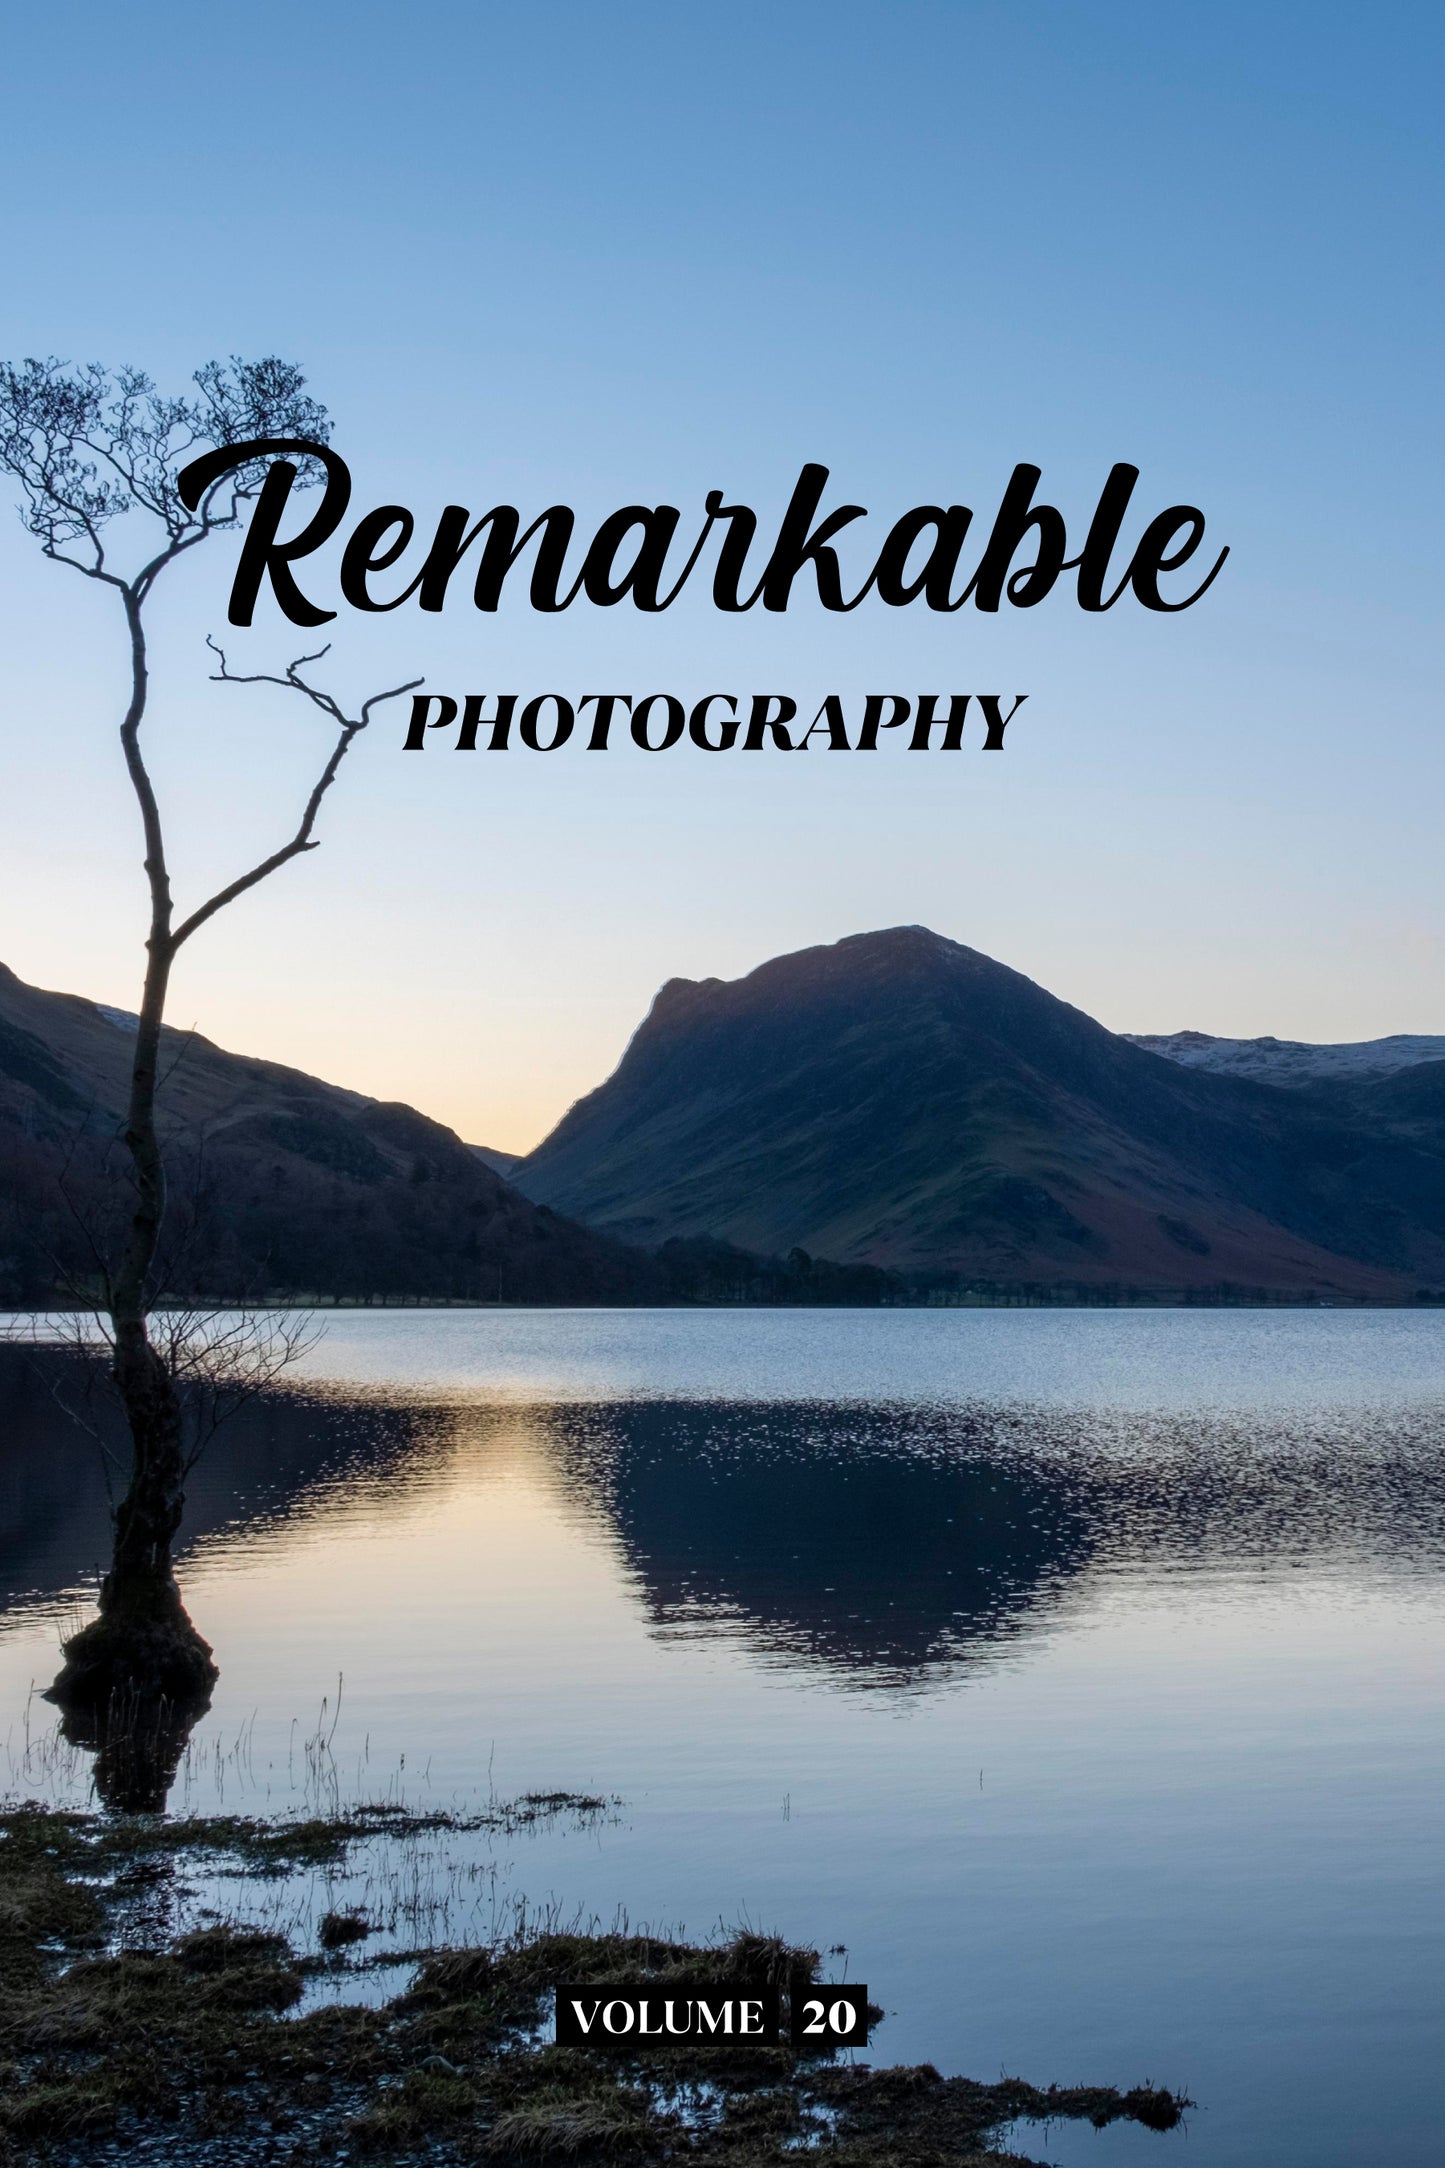 Remarkable Photography Volume 20 (Physical Book)